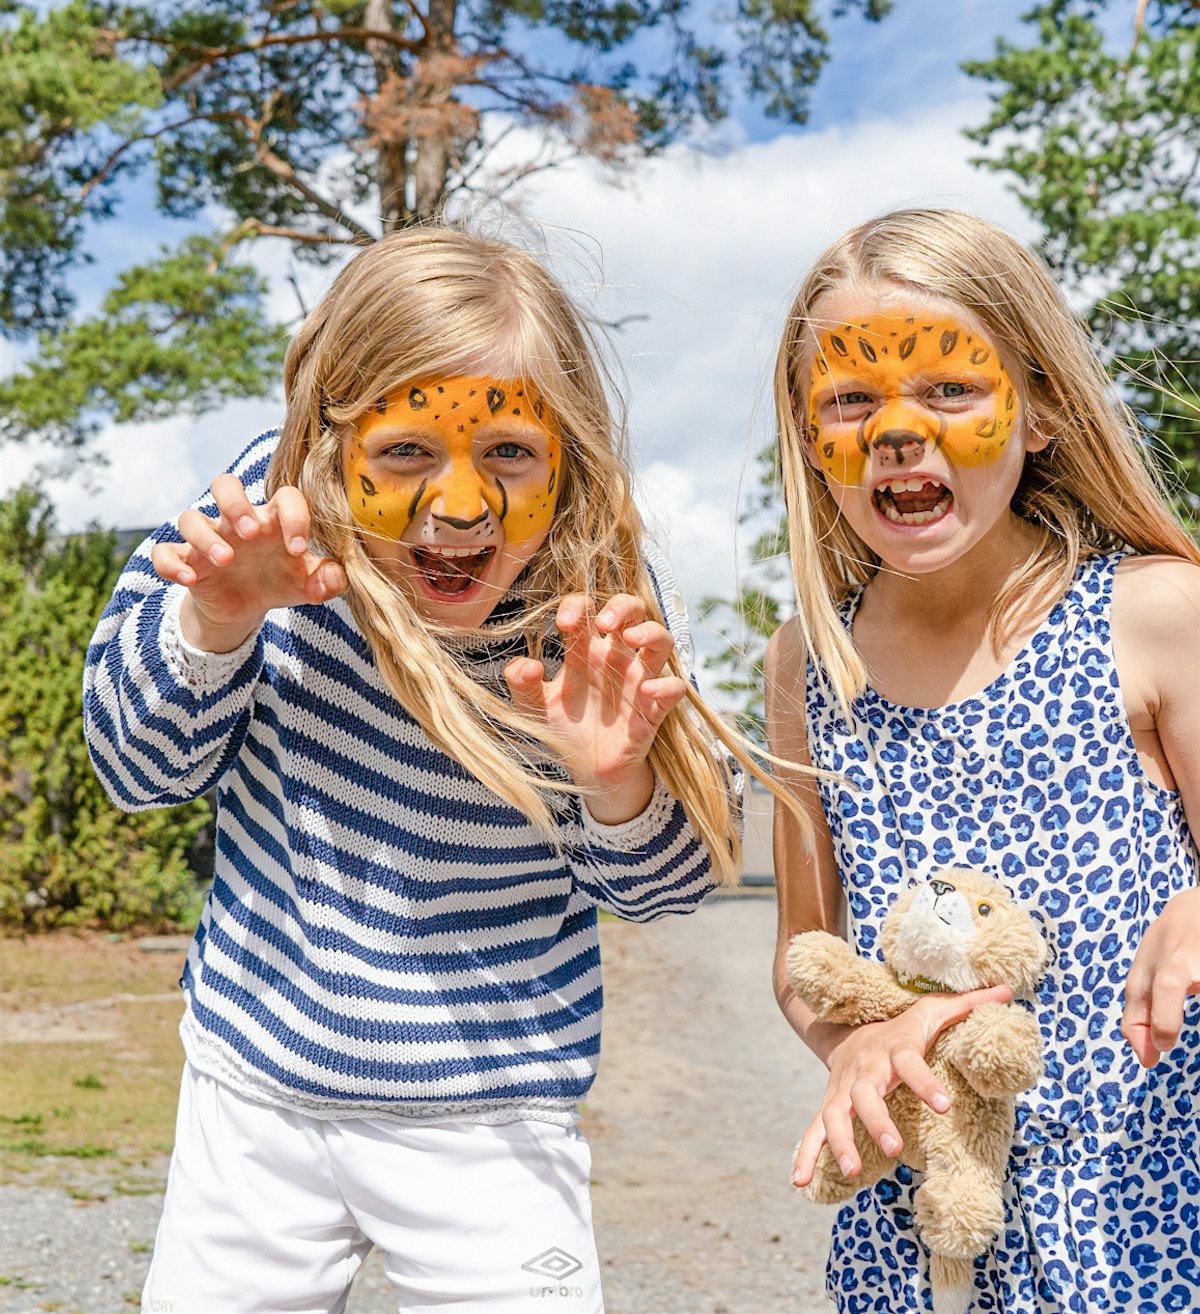 Two girls have had their faces painted as leopards. Making leopard faces for the camera. Photo